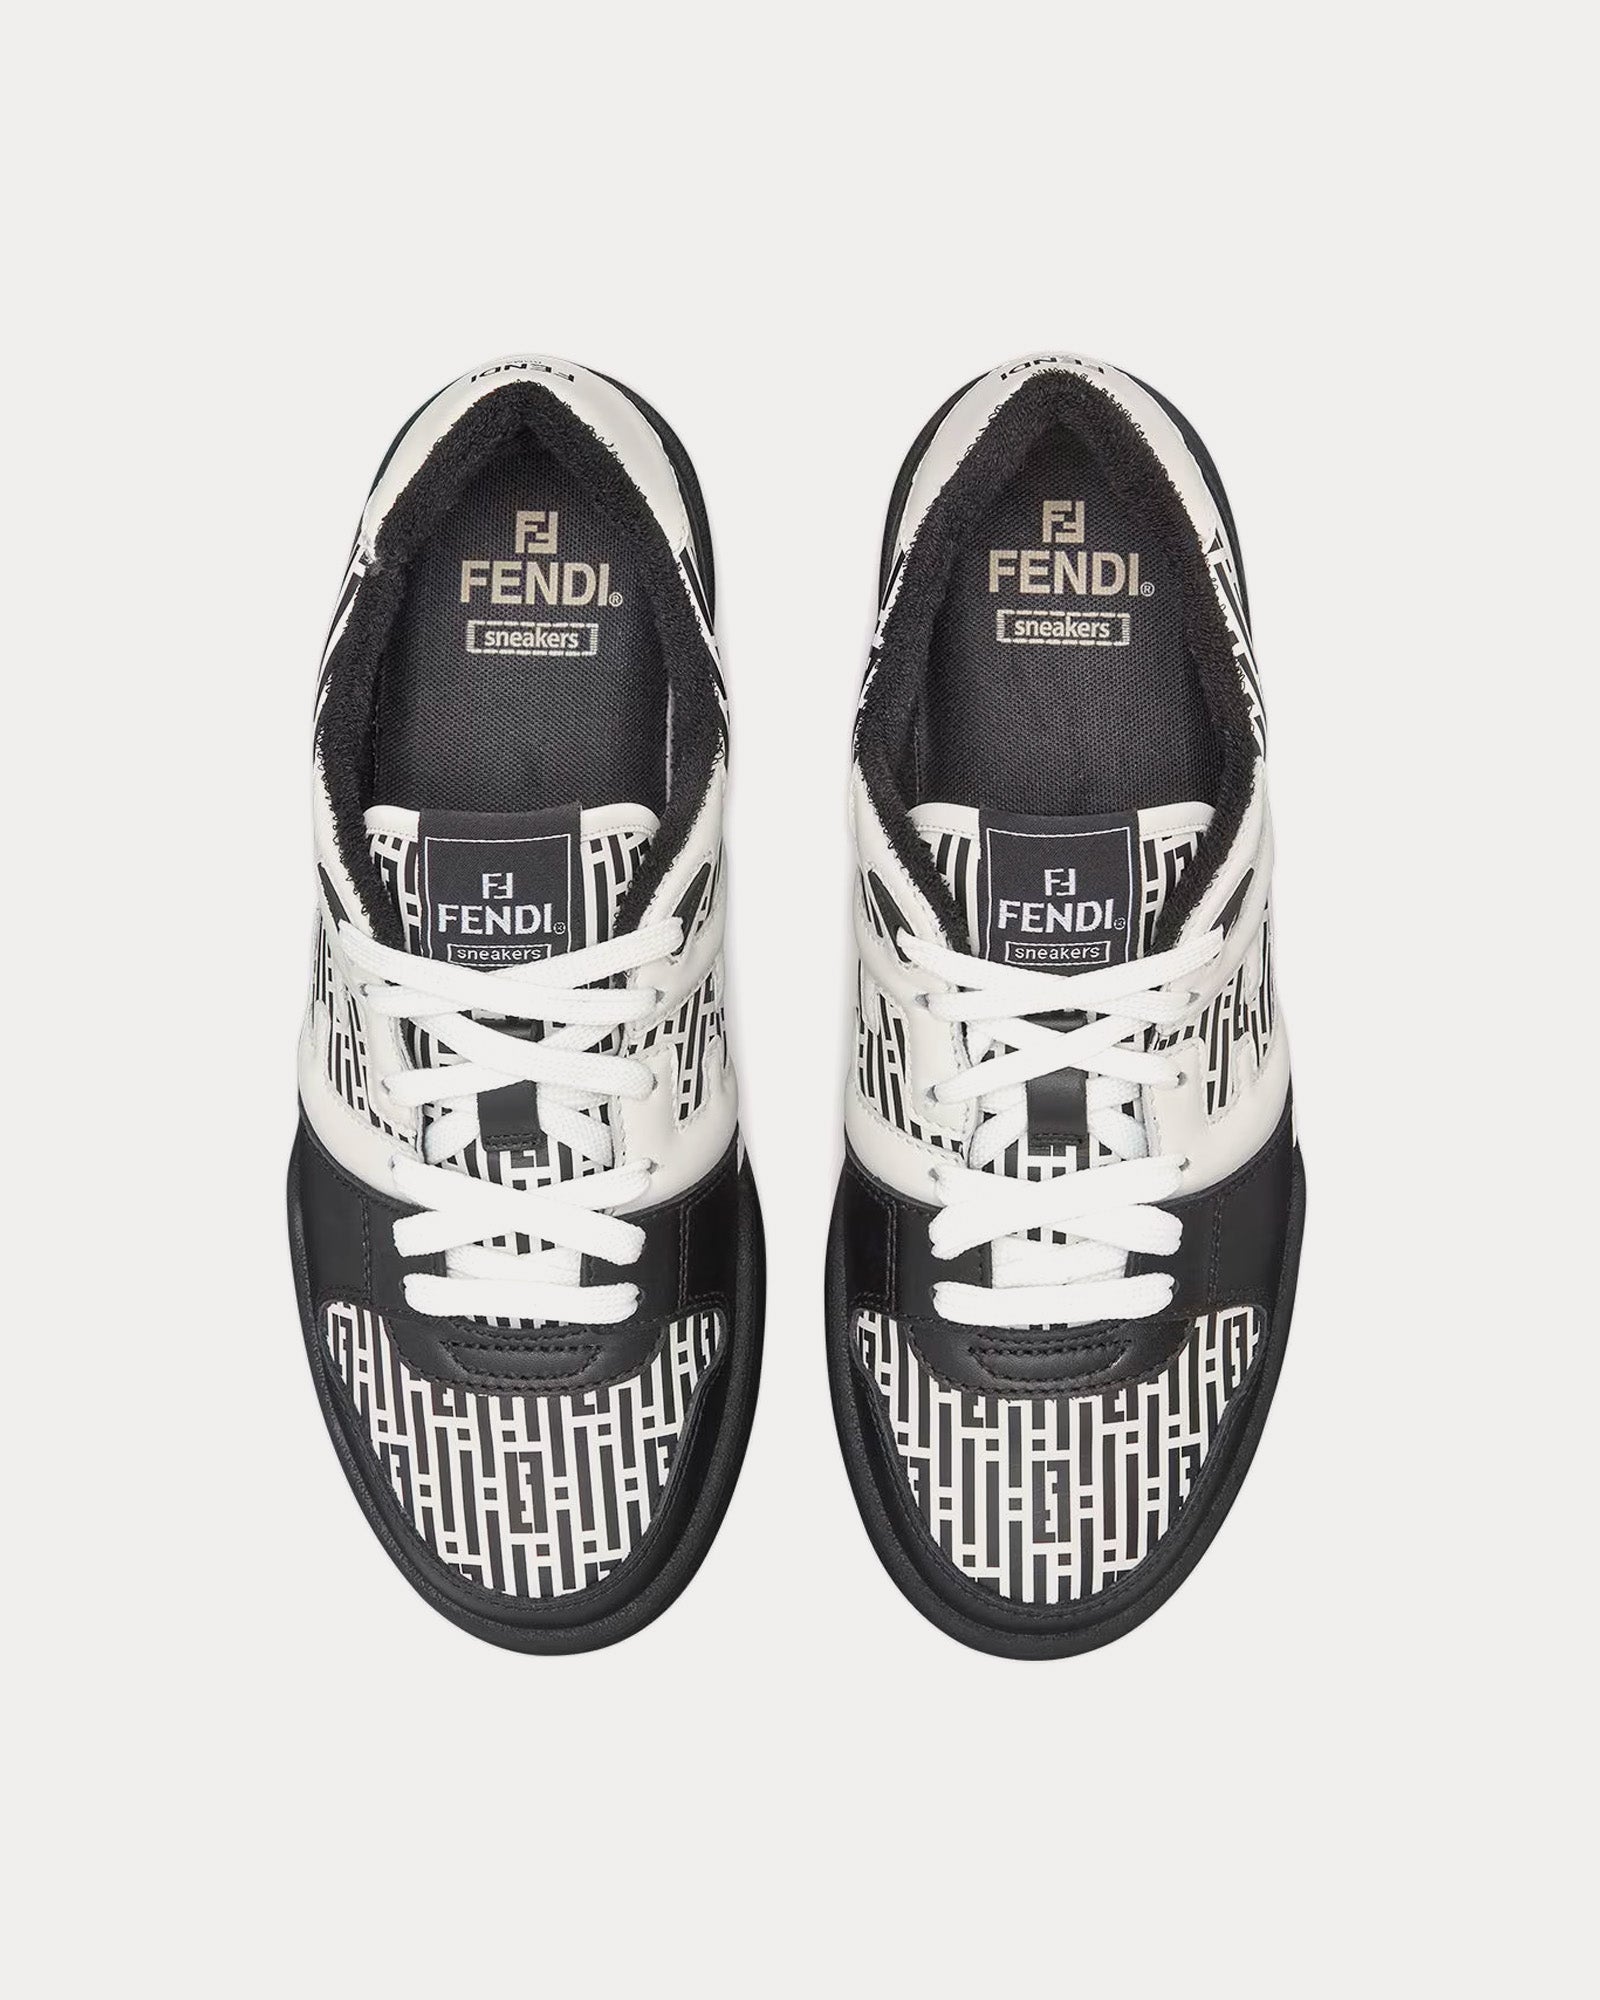 Fendi by Stefano Pilati - Match Leather White / Black Low Top Sneakers